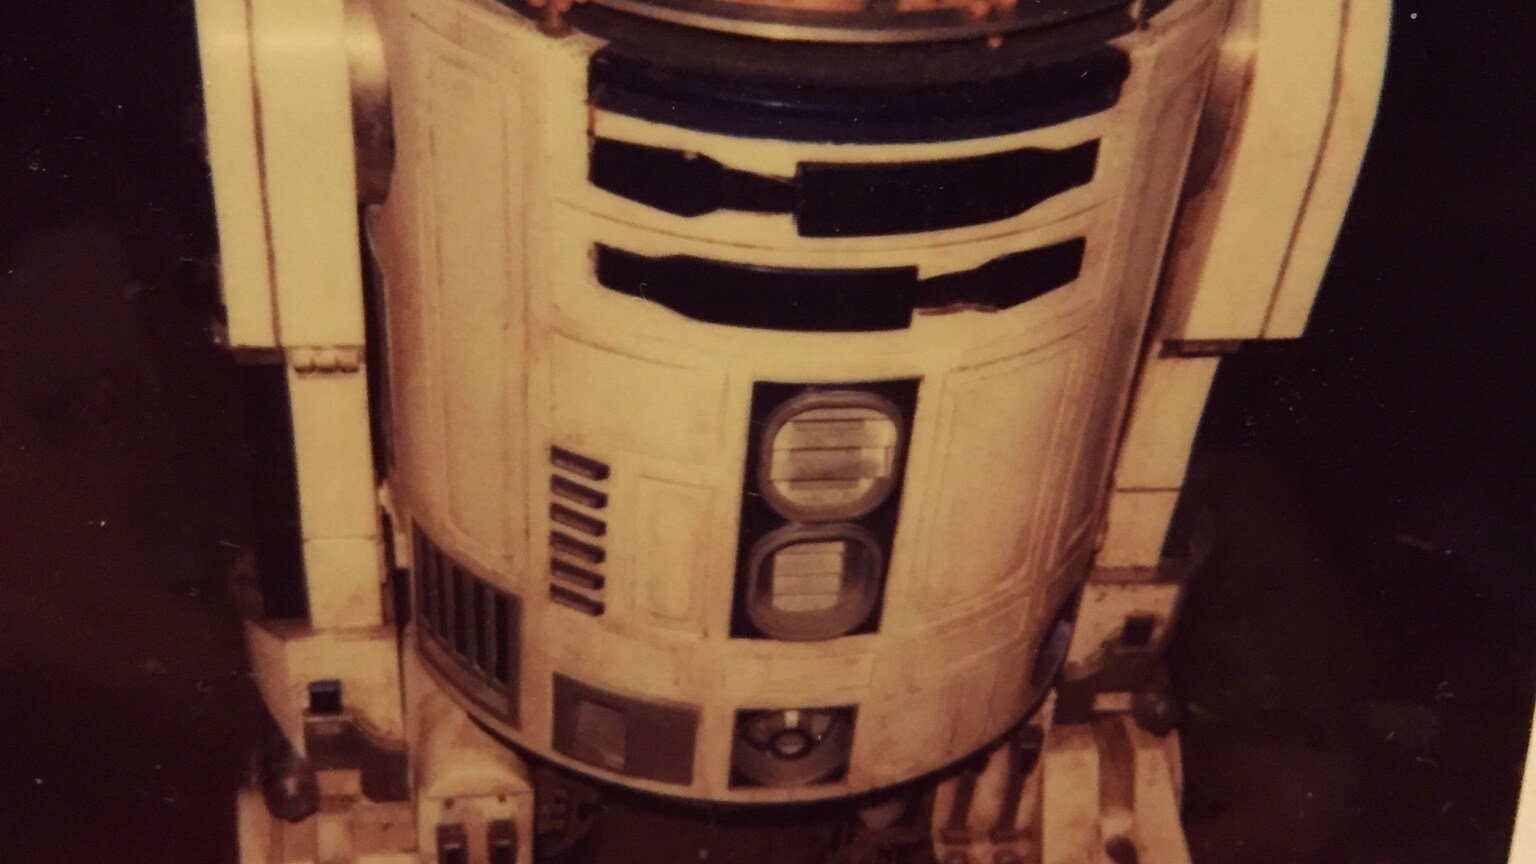 The perfect hiding place: Nathan Hamill inside R2-D2.